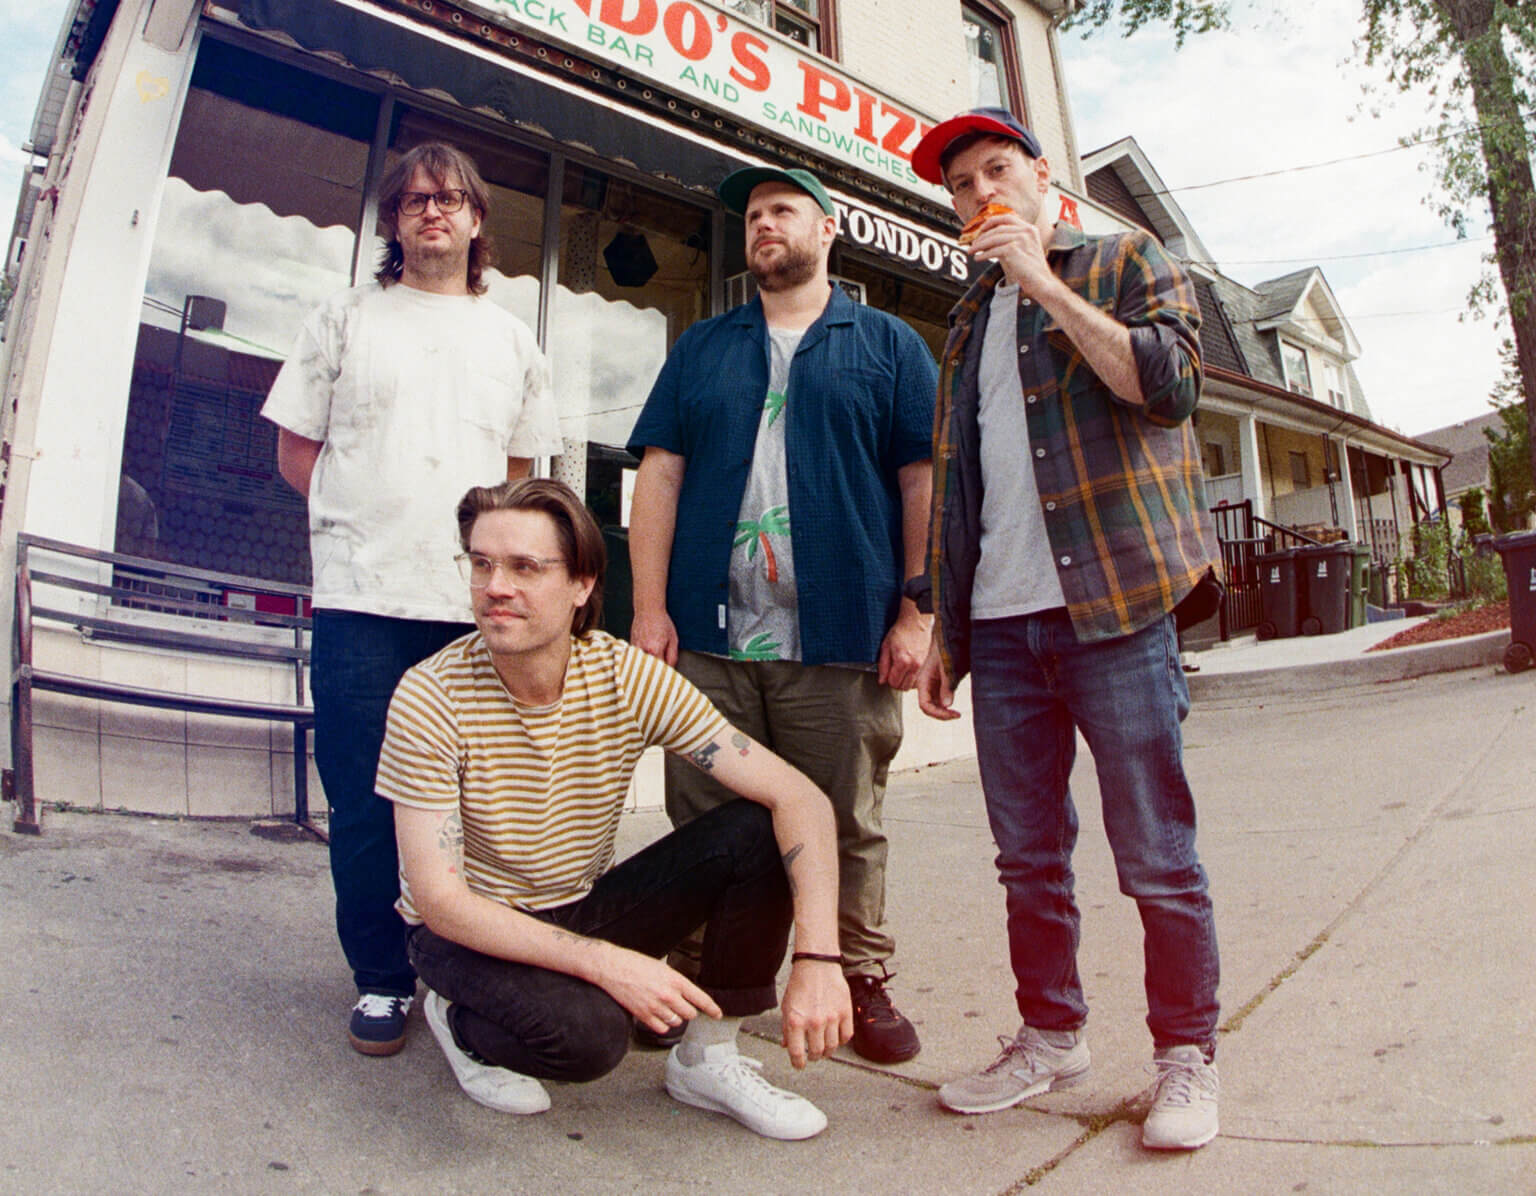 PUP drop their new album The Unraveling Of Puptheband on April 1, 2022. Ahead of the release, they have shared a video for “Matilda”